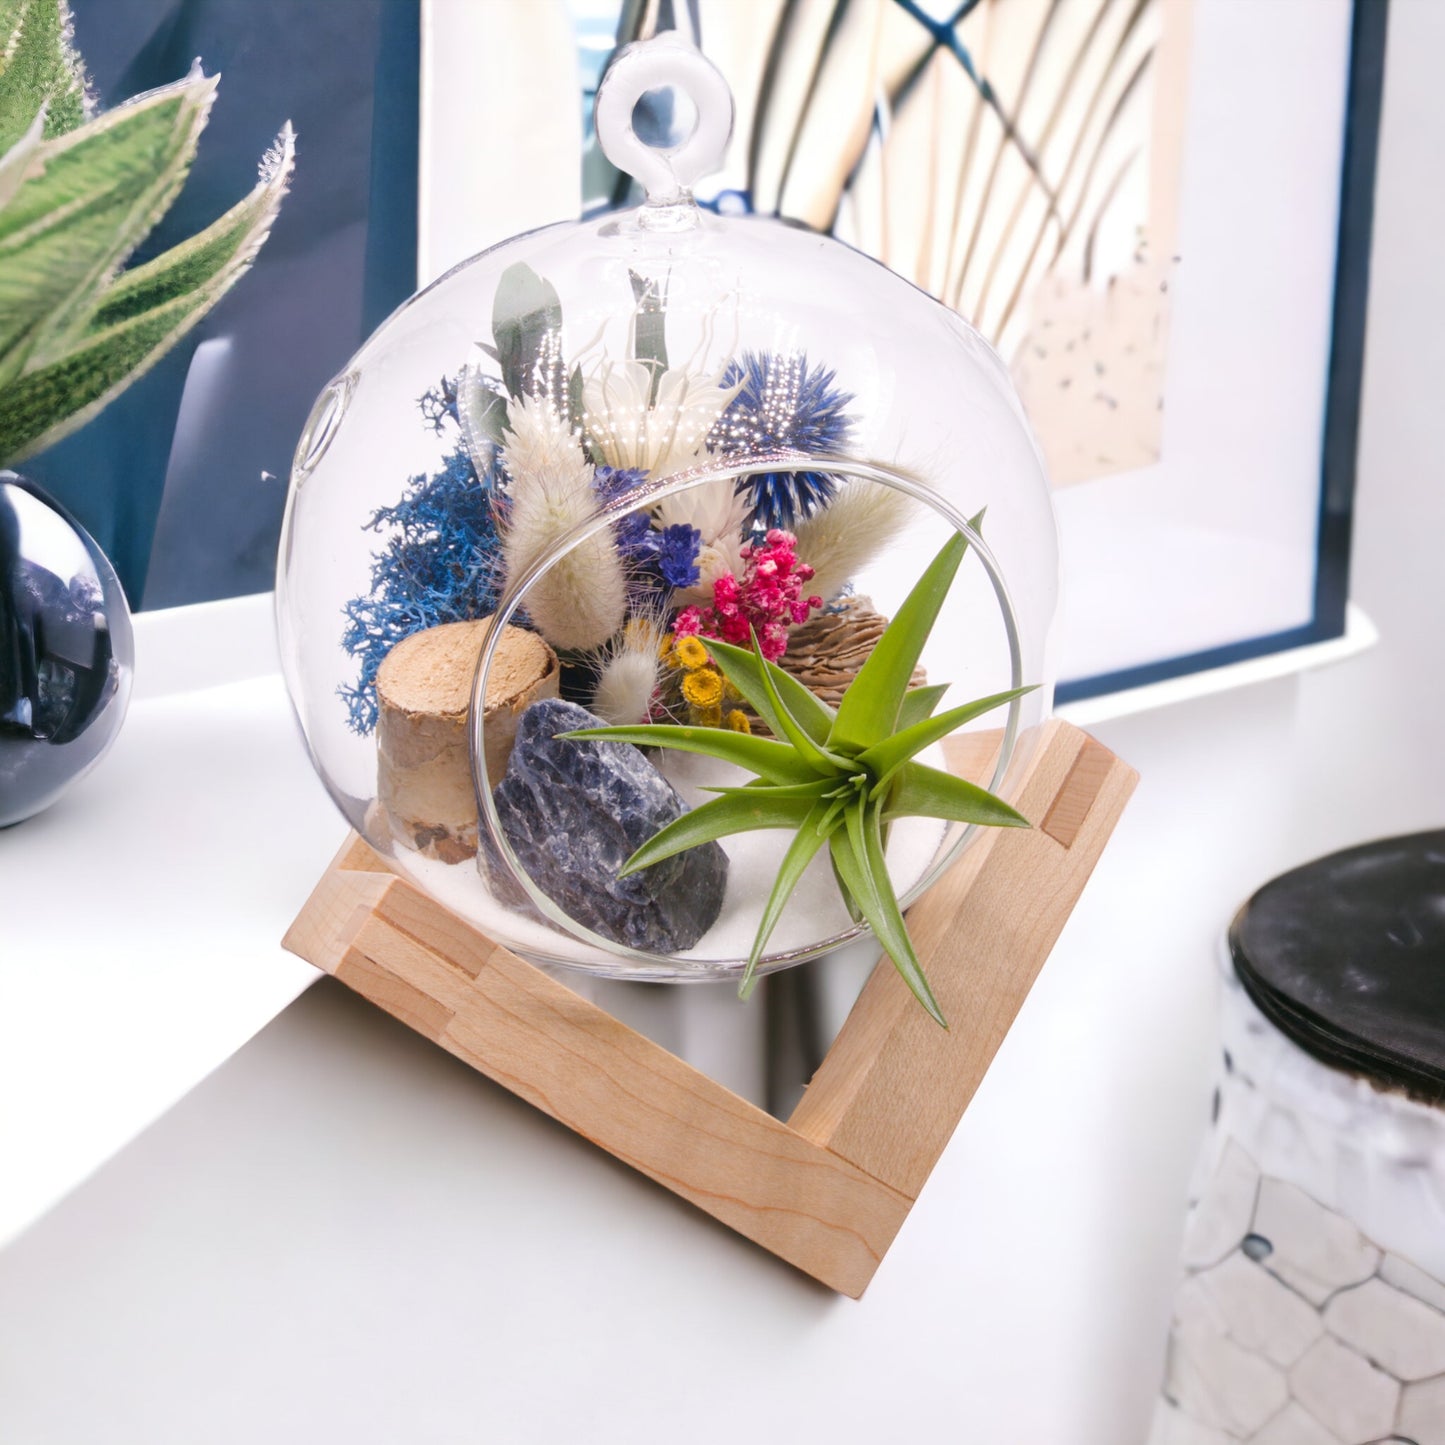 Glass bubble terrarium with sand, dried flowers, wood, moss, sodalite stone, and an airplant